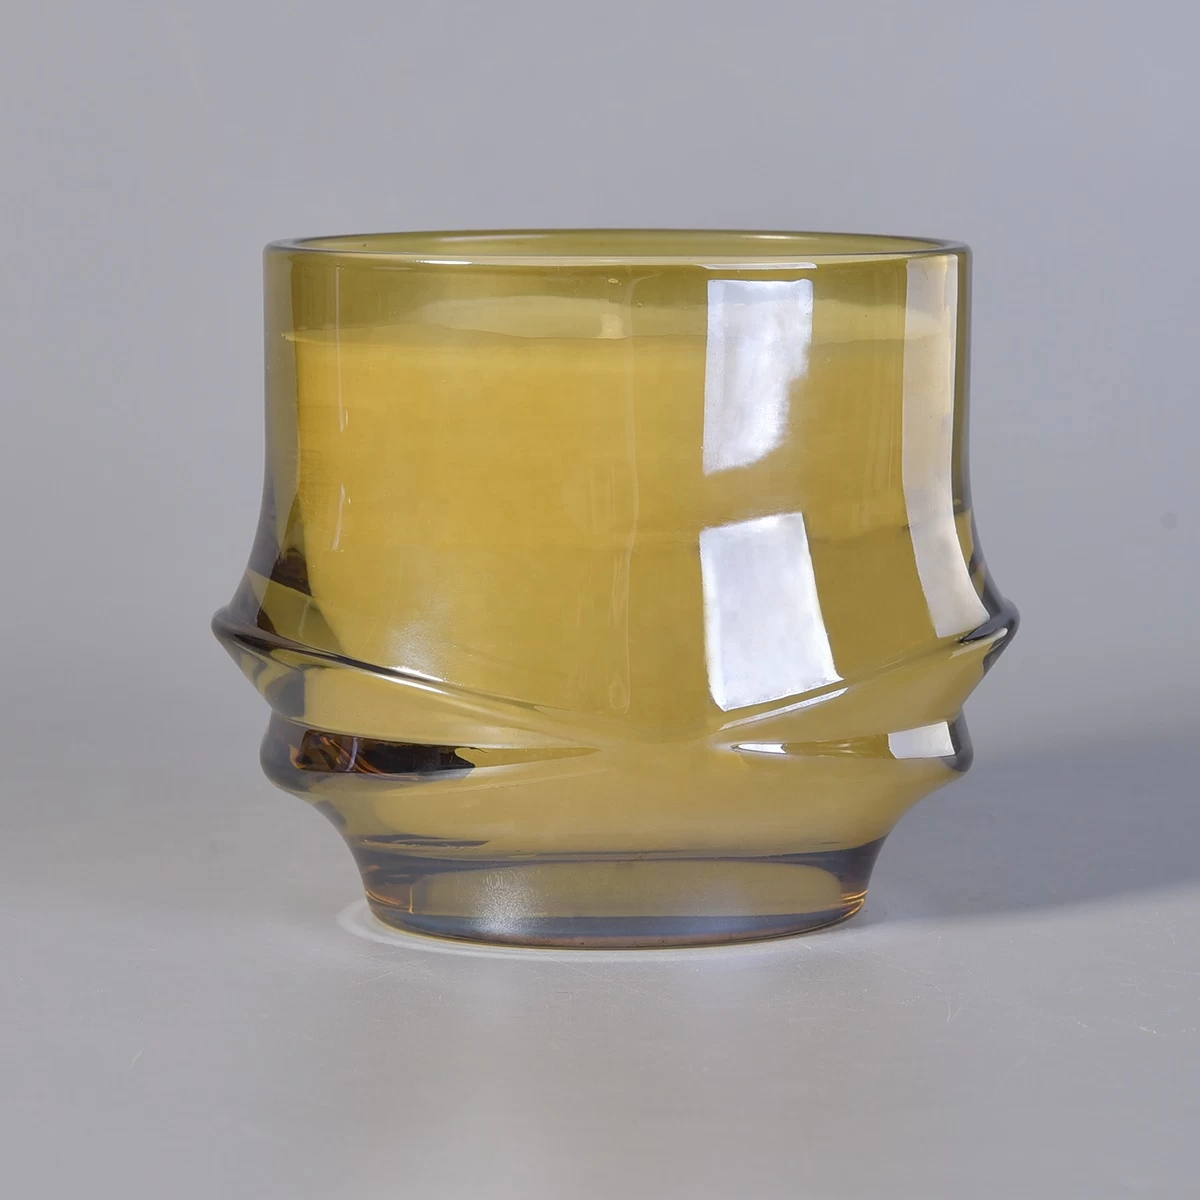 Sunny X-design luxury golden glass candle jars home decoration